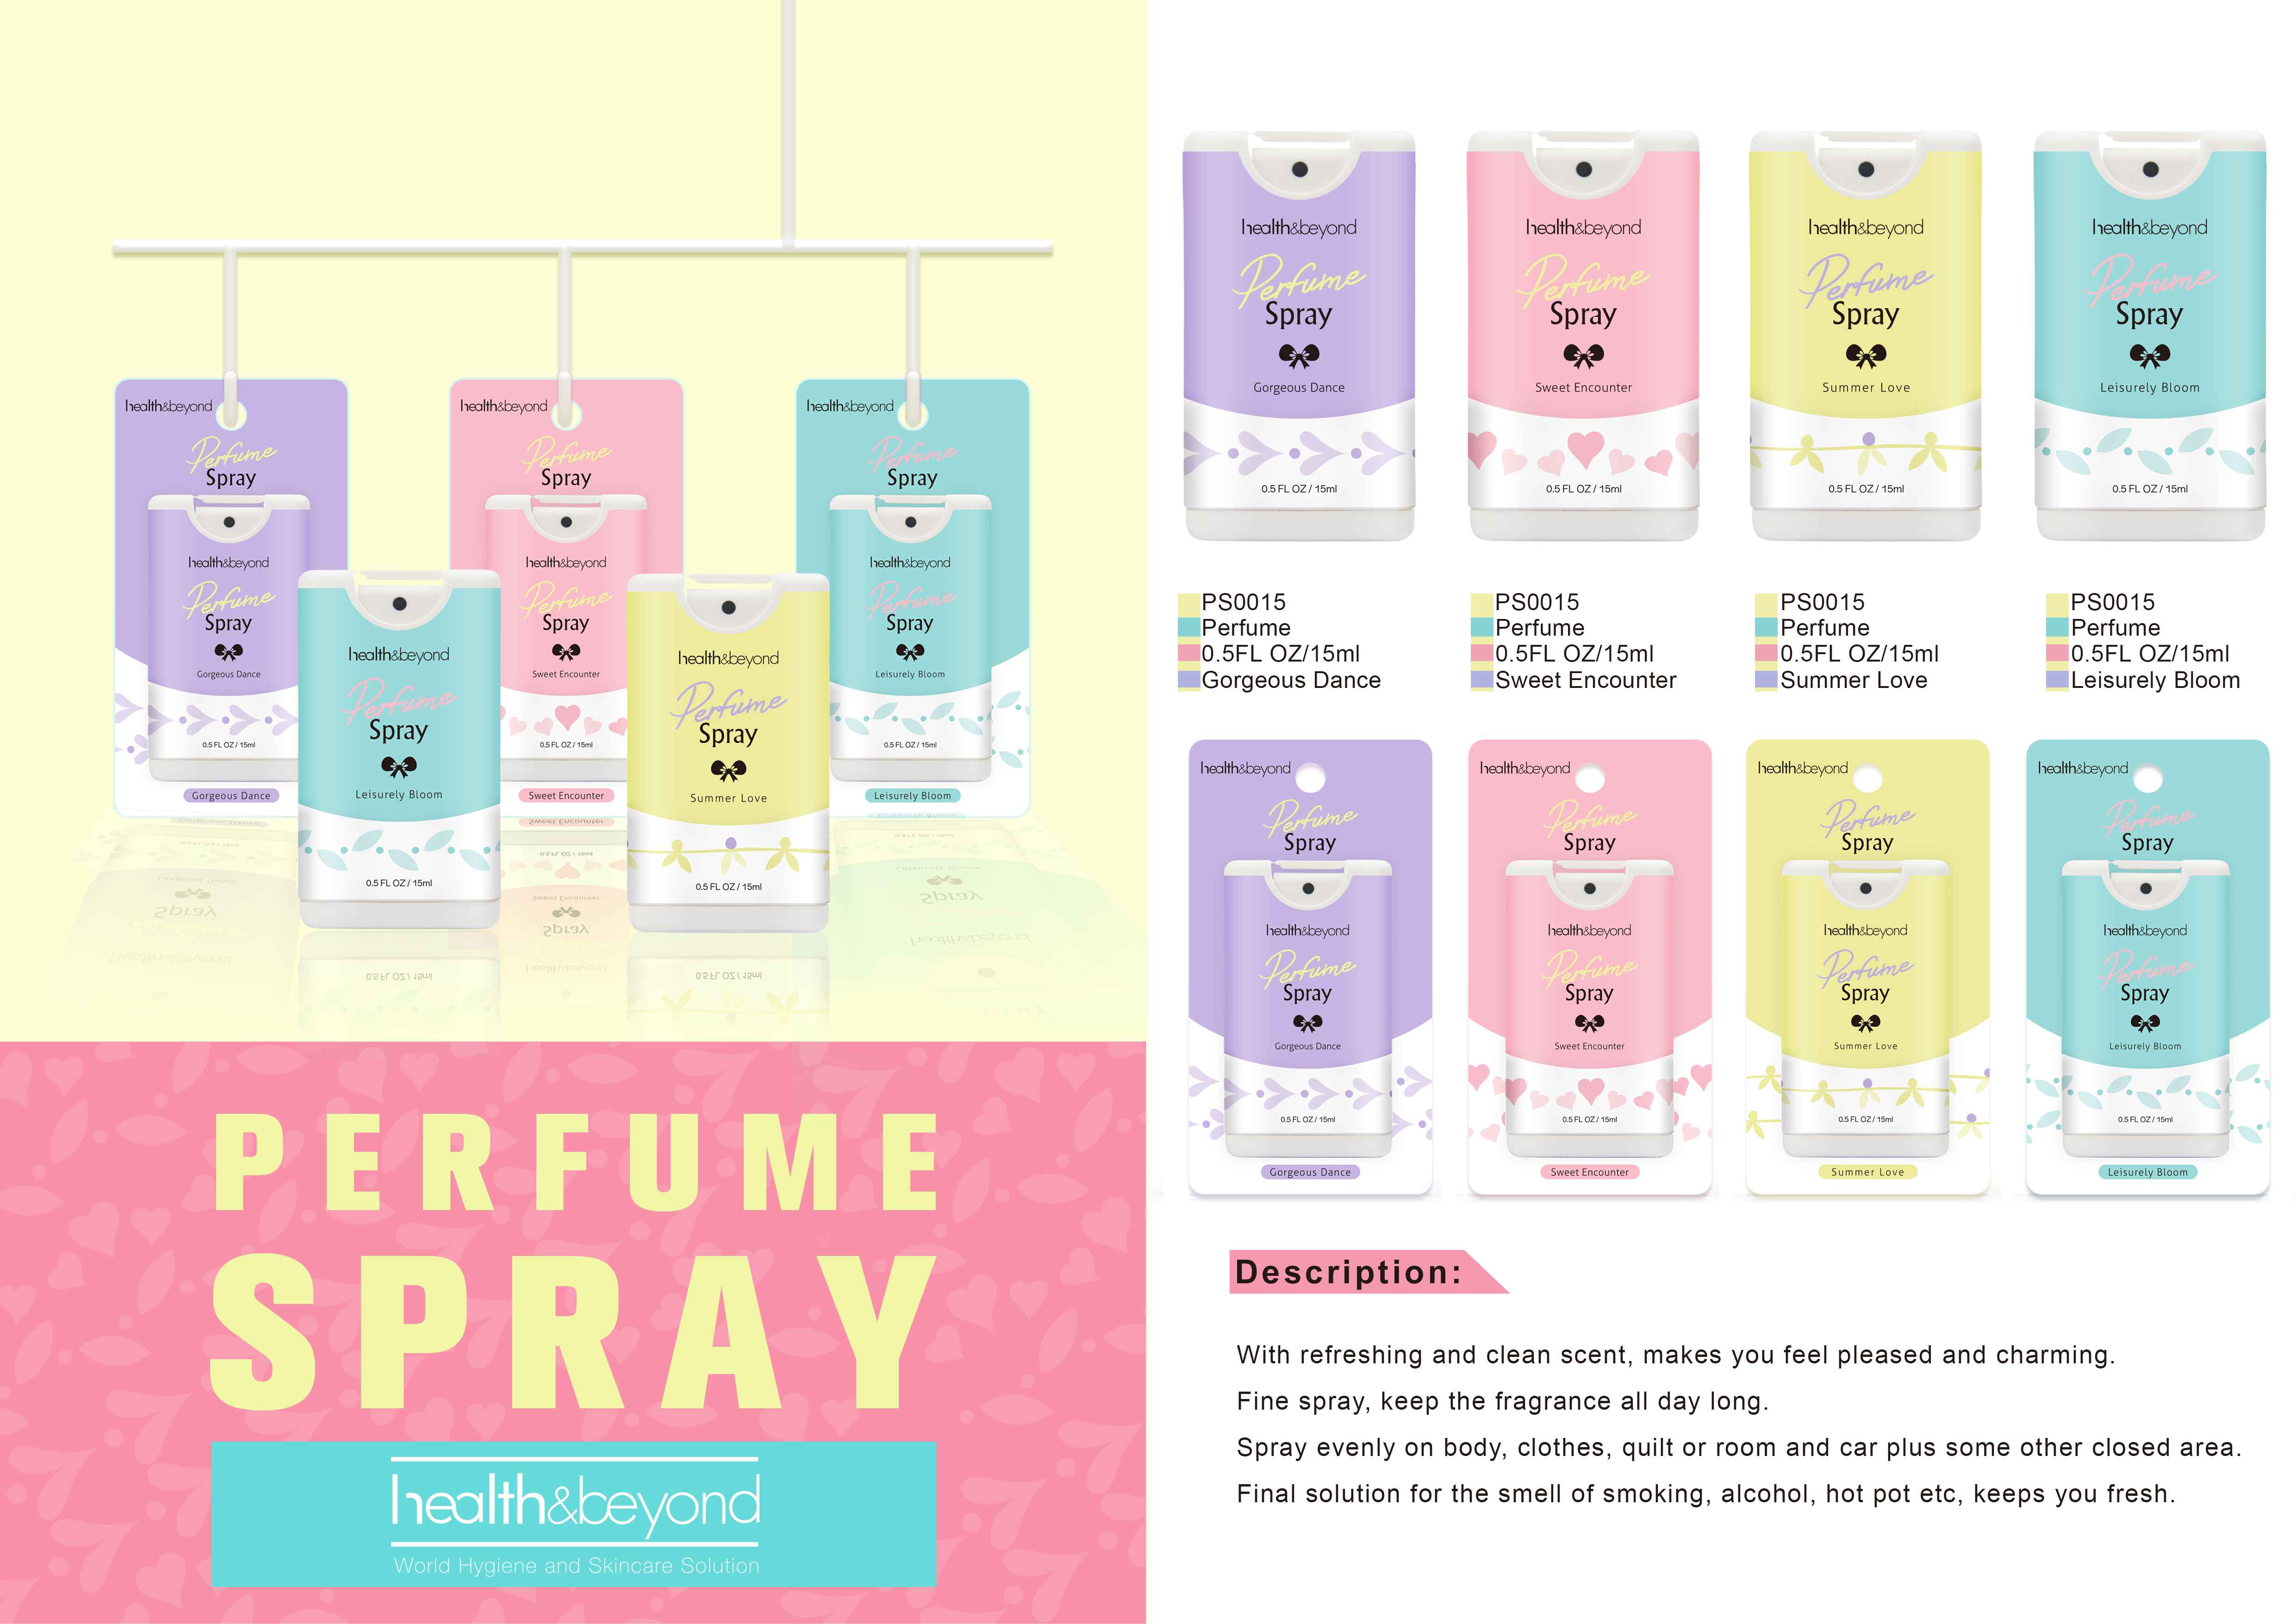 Is the Card Body Spray equivalent to perfume?